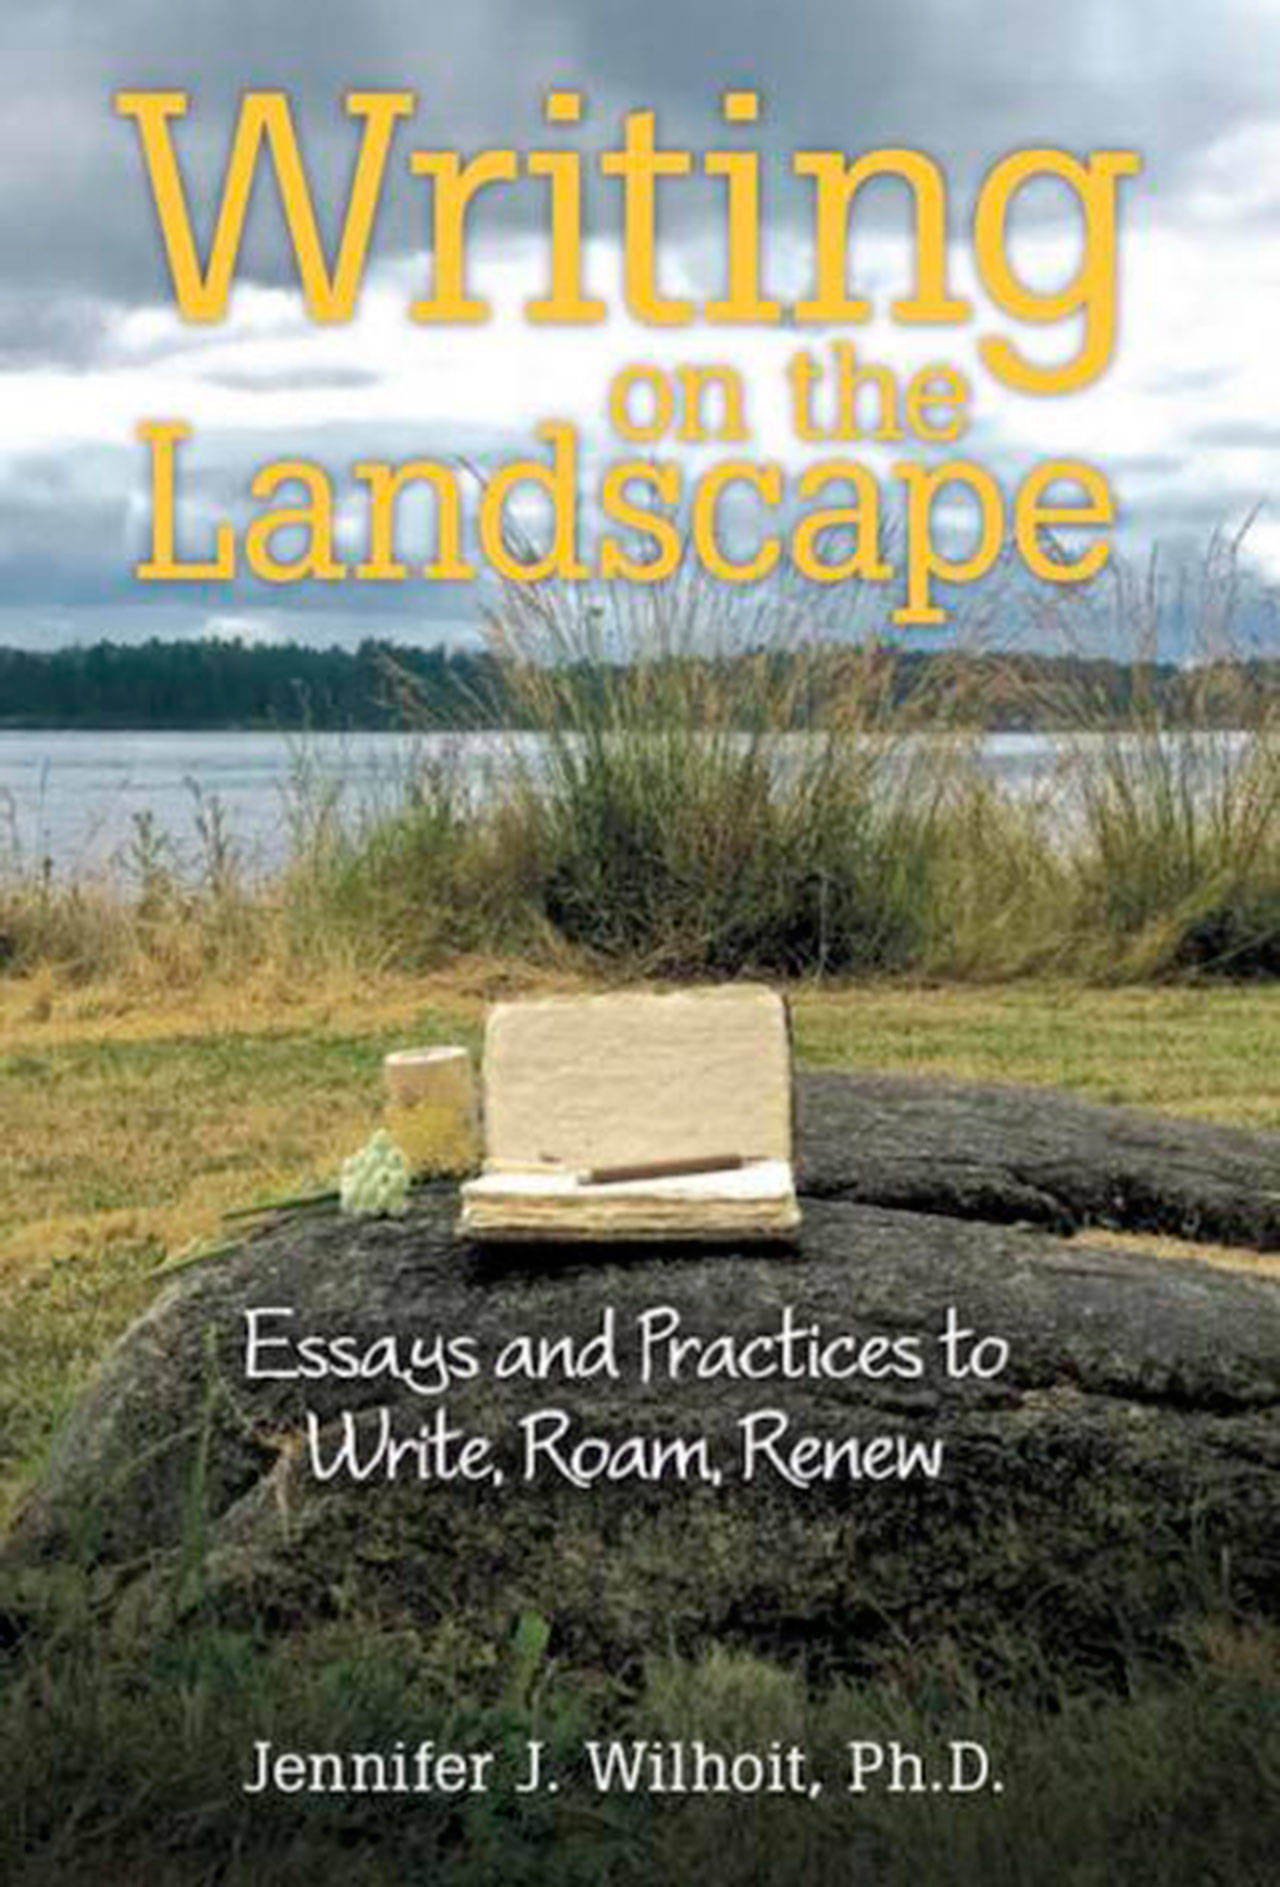 Image courtesy of Eagle Harbor Book Company | Bainbridge Island author Jennifer J. Wilhoit will discuss her book “Writing on the Landscape: Essays and Practices to Write, Roam, Renew” at 7 p.m. Thursday, Jan. 11 at Eagle Harbor Books in downtown Winslow.